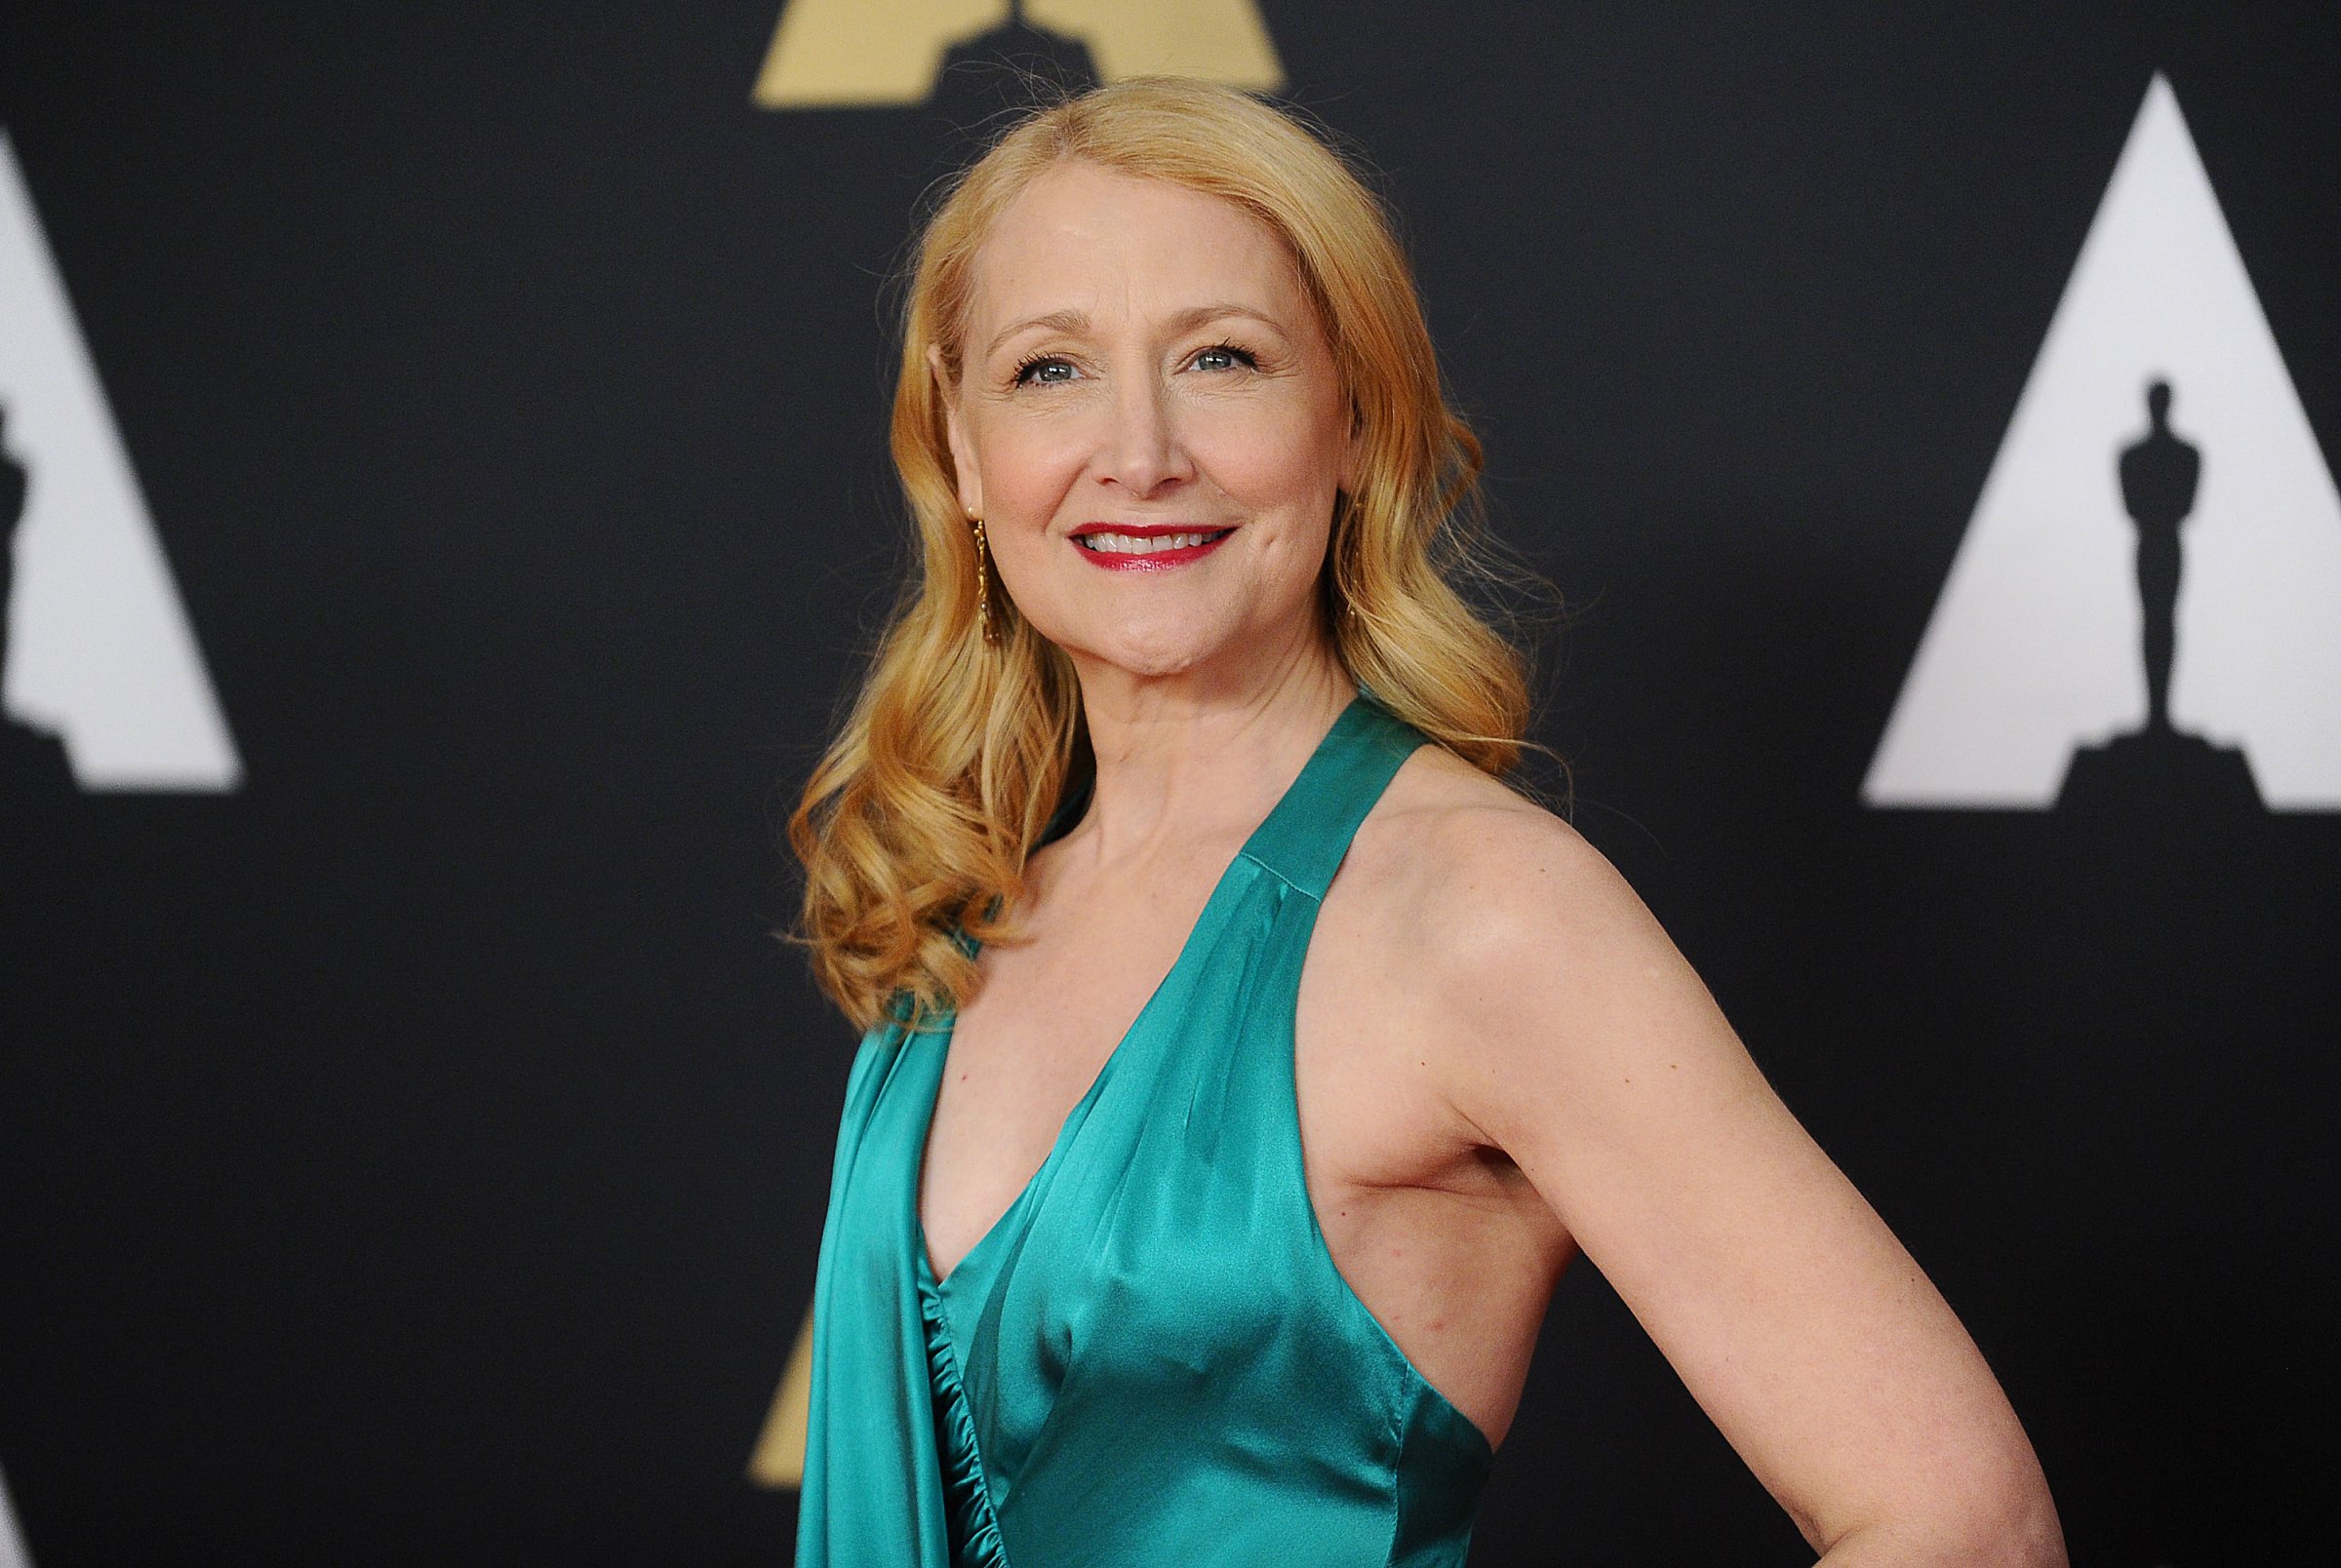 Actress Patricia Clarkson attends the 7th annual Governors Awards at The Ray Dolby Ballroom at Hollywood &amp; Highland Center on November 14, 2015 in Hollywood, California.